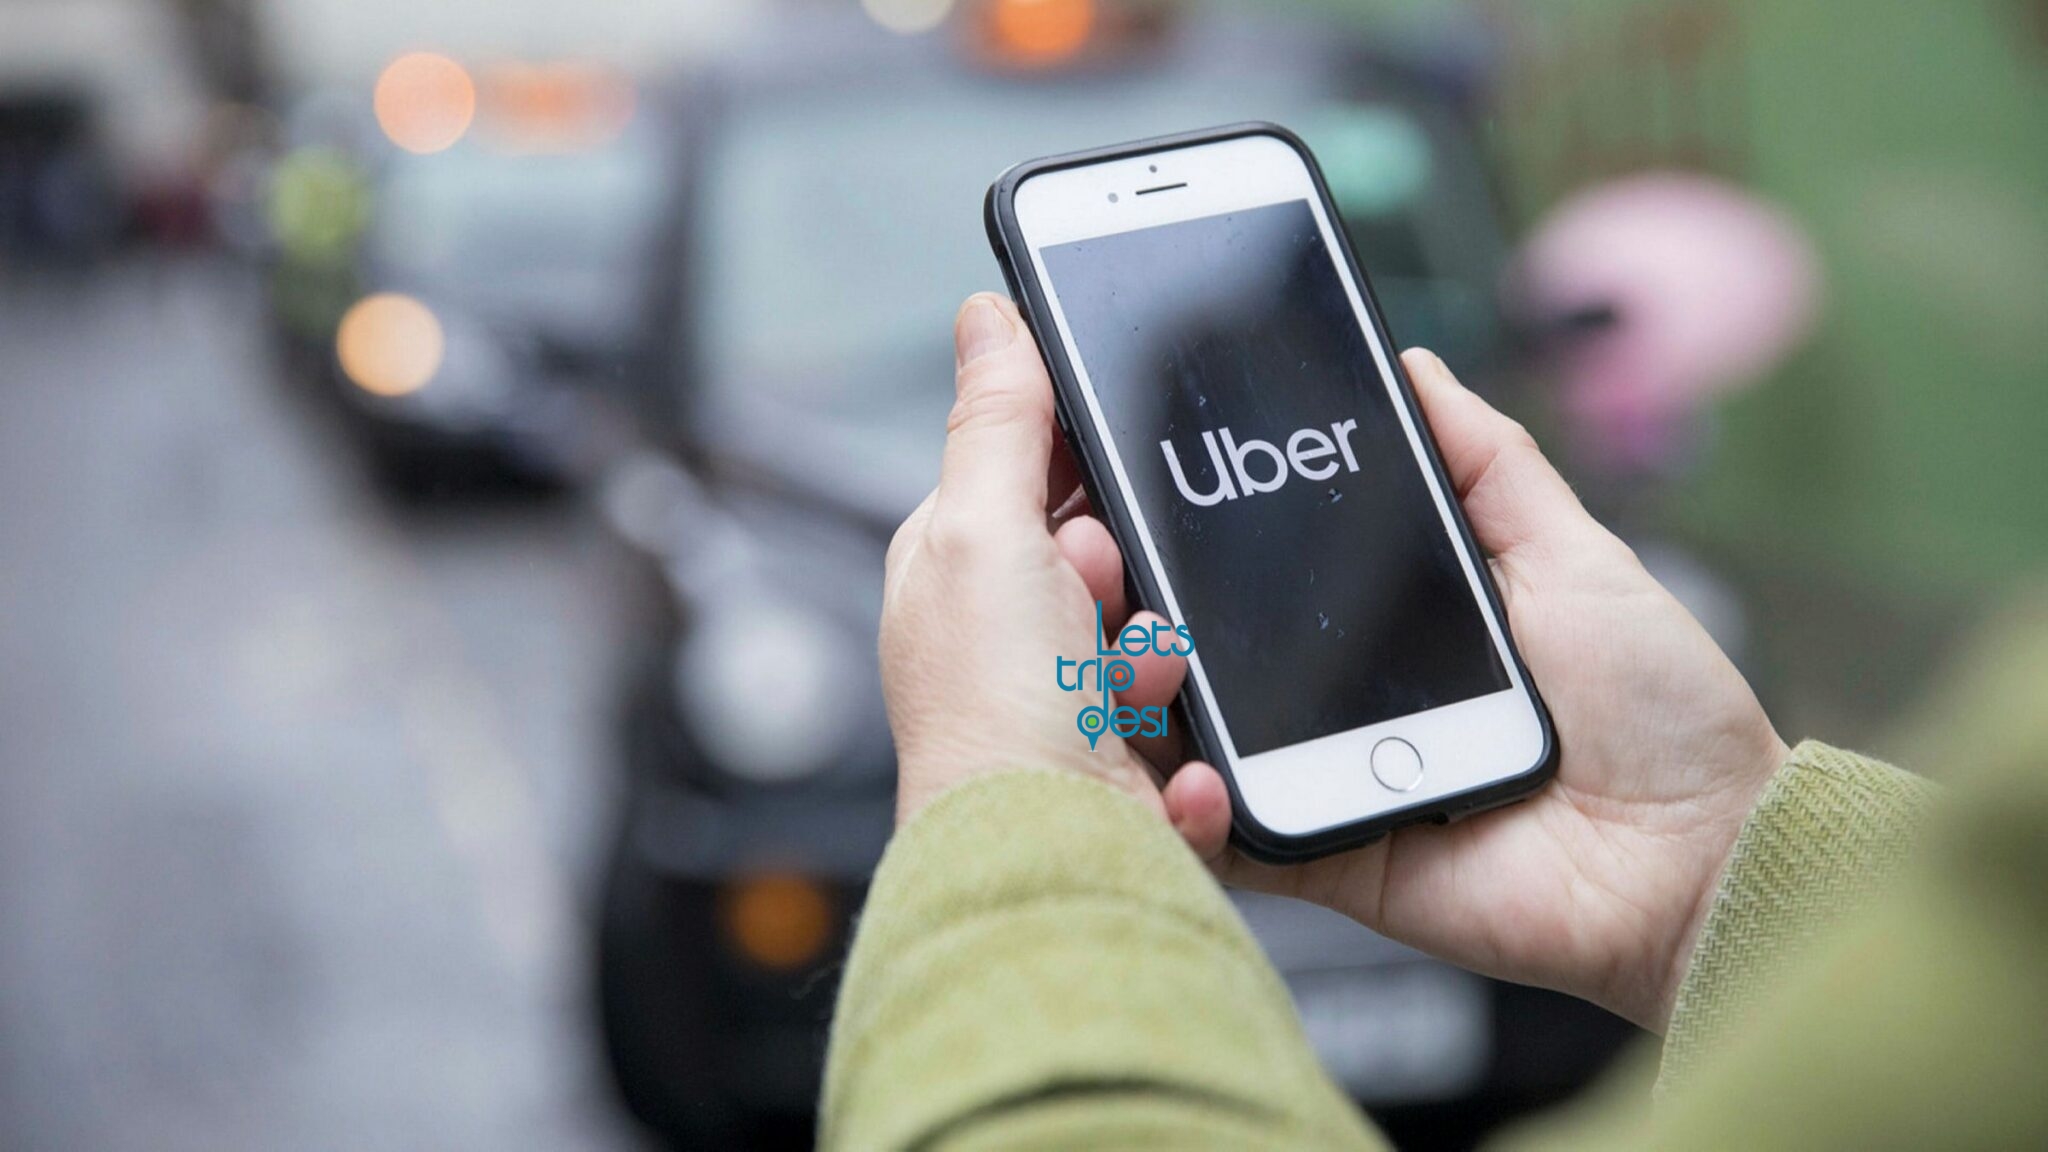 You Will Soon Be Able to Book Trains, Flights and Hotel Tickets with Uber